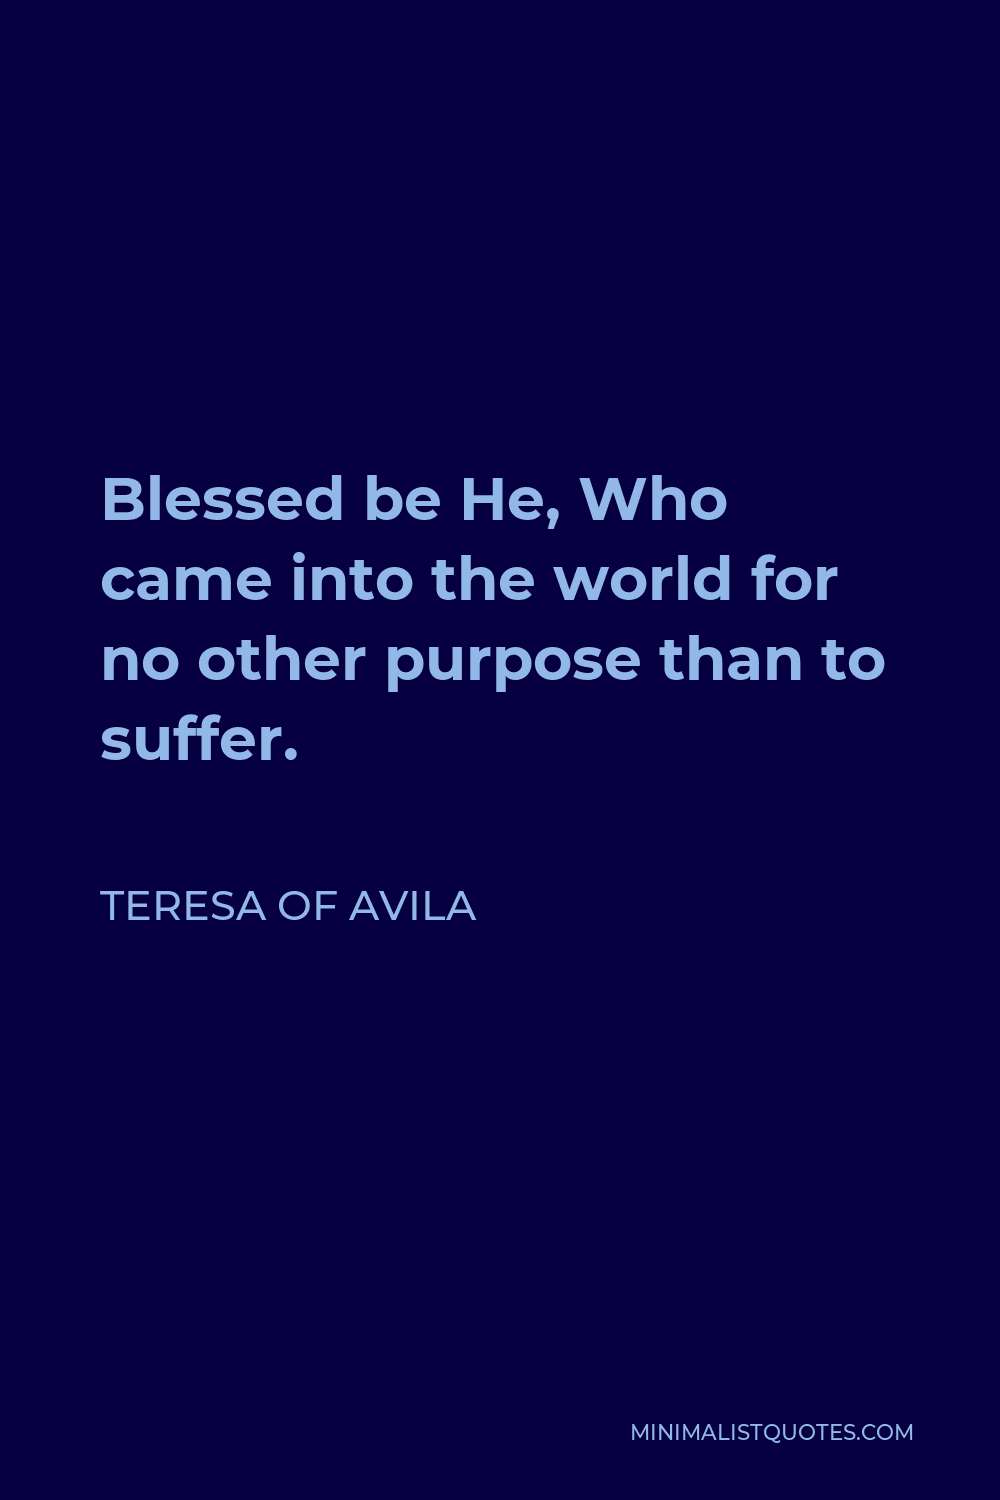 Teresa of Avila Quote - Blessed be He, Who came into the world for no other purpose than to suffer.